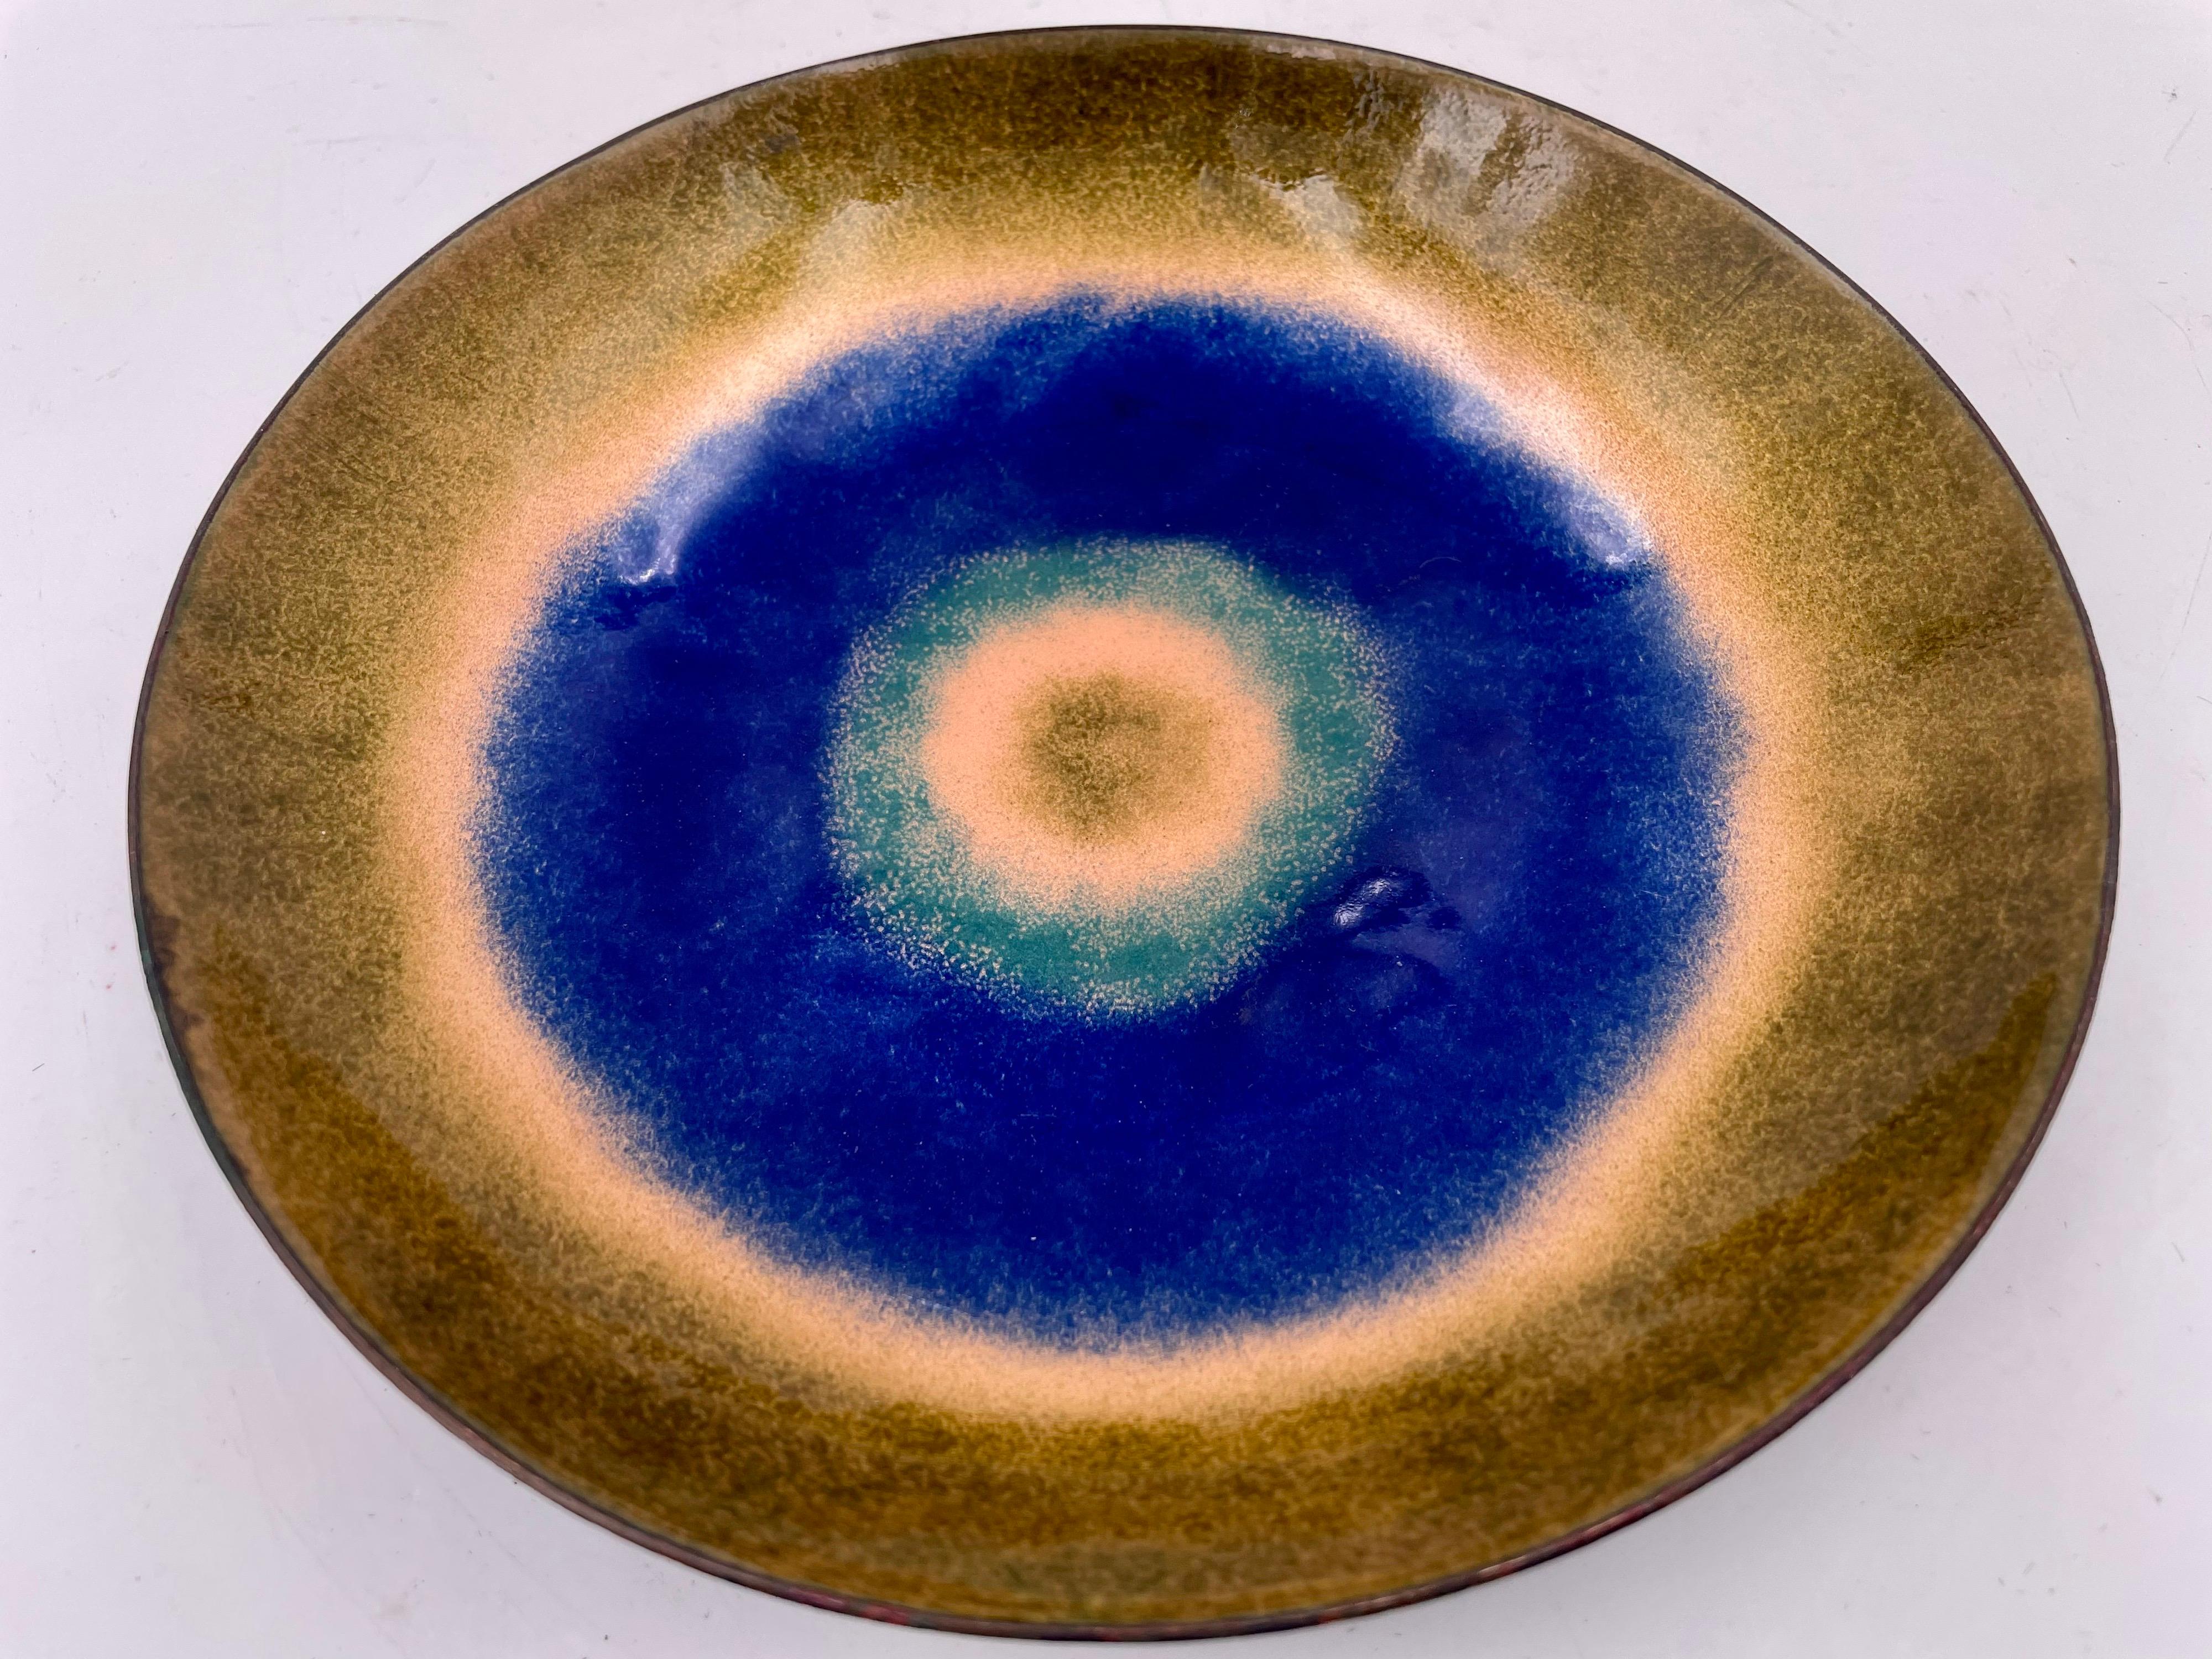 Mid-Century Modern 1970s Abstract Enamel on Copper Bowl by Rosemarie Toogood California Design